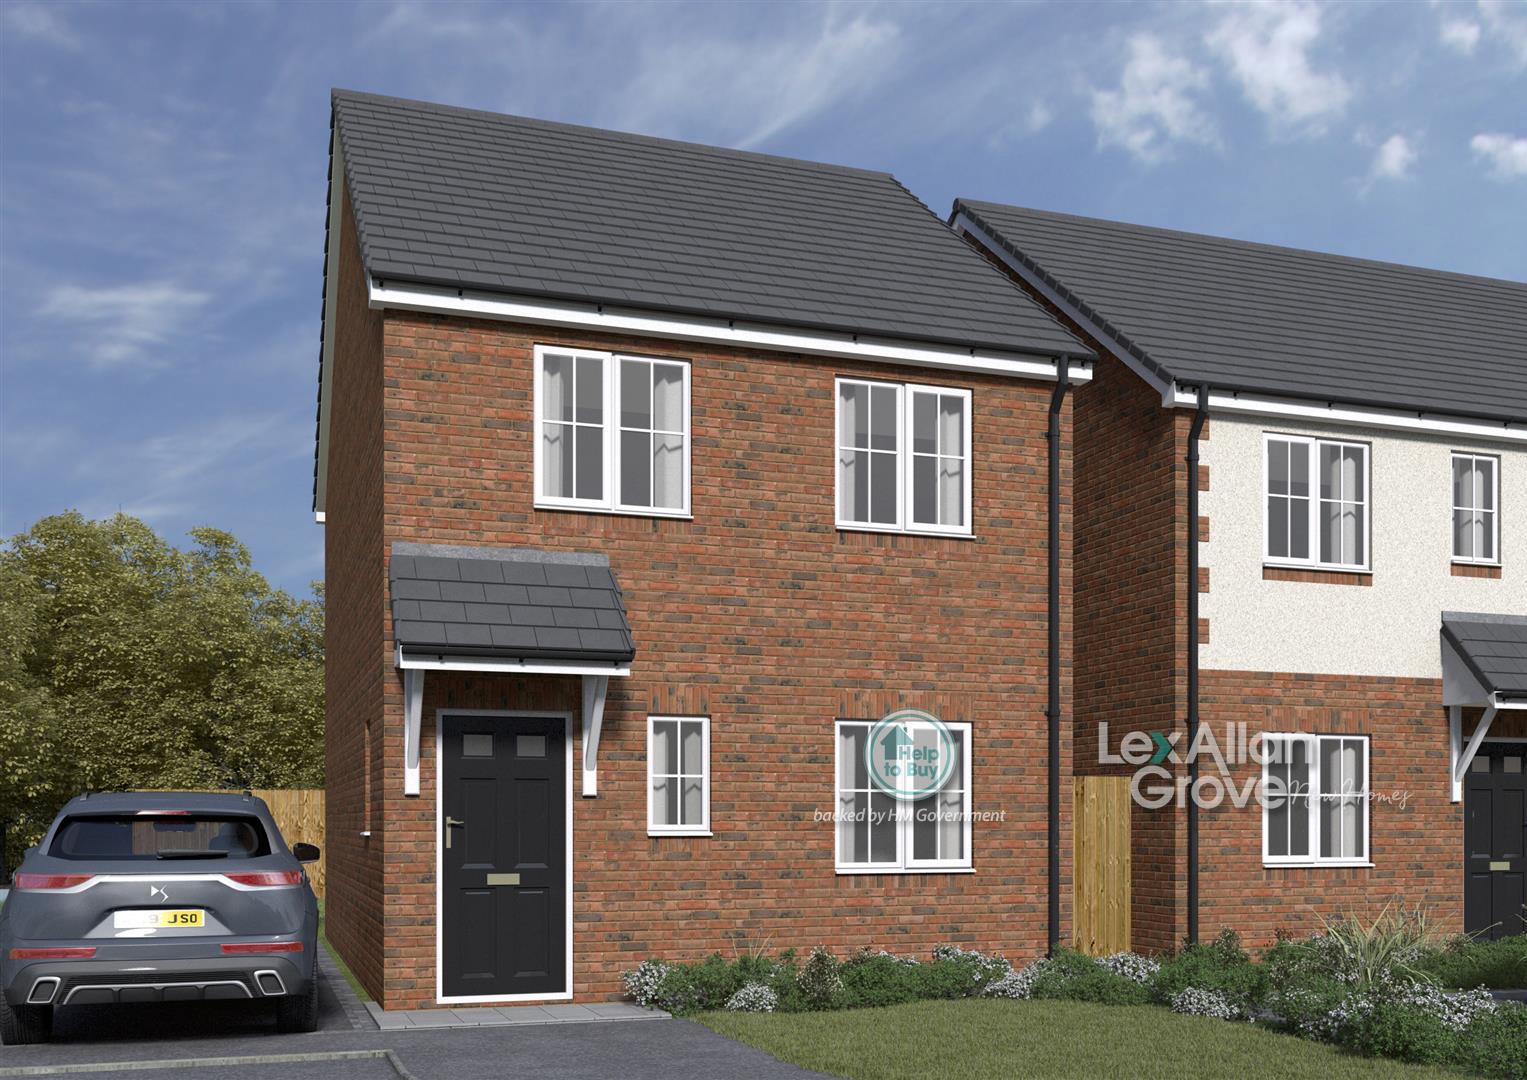 3 bed  for sale in Leys Road, Brierley Hill, DY5 